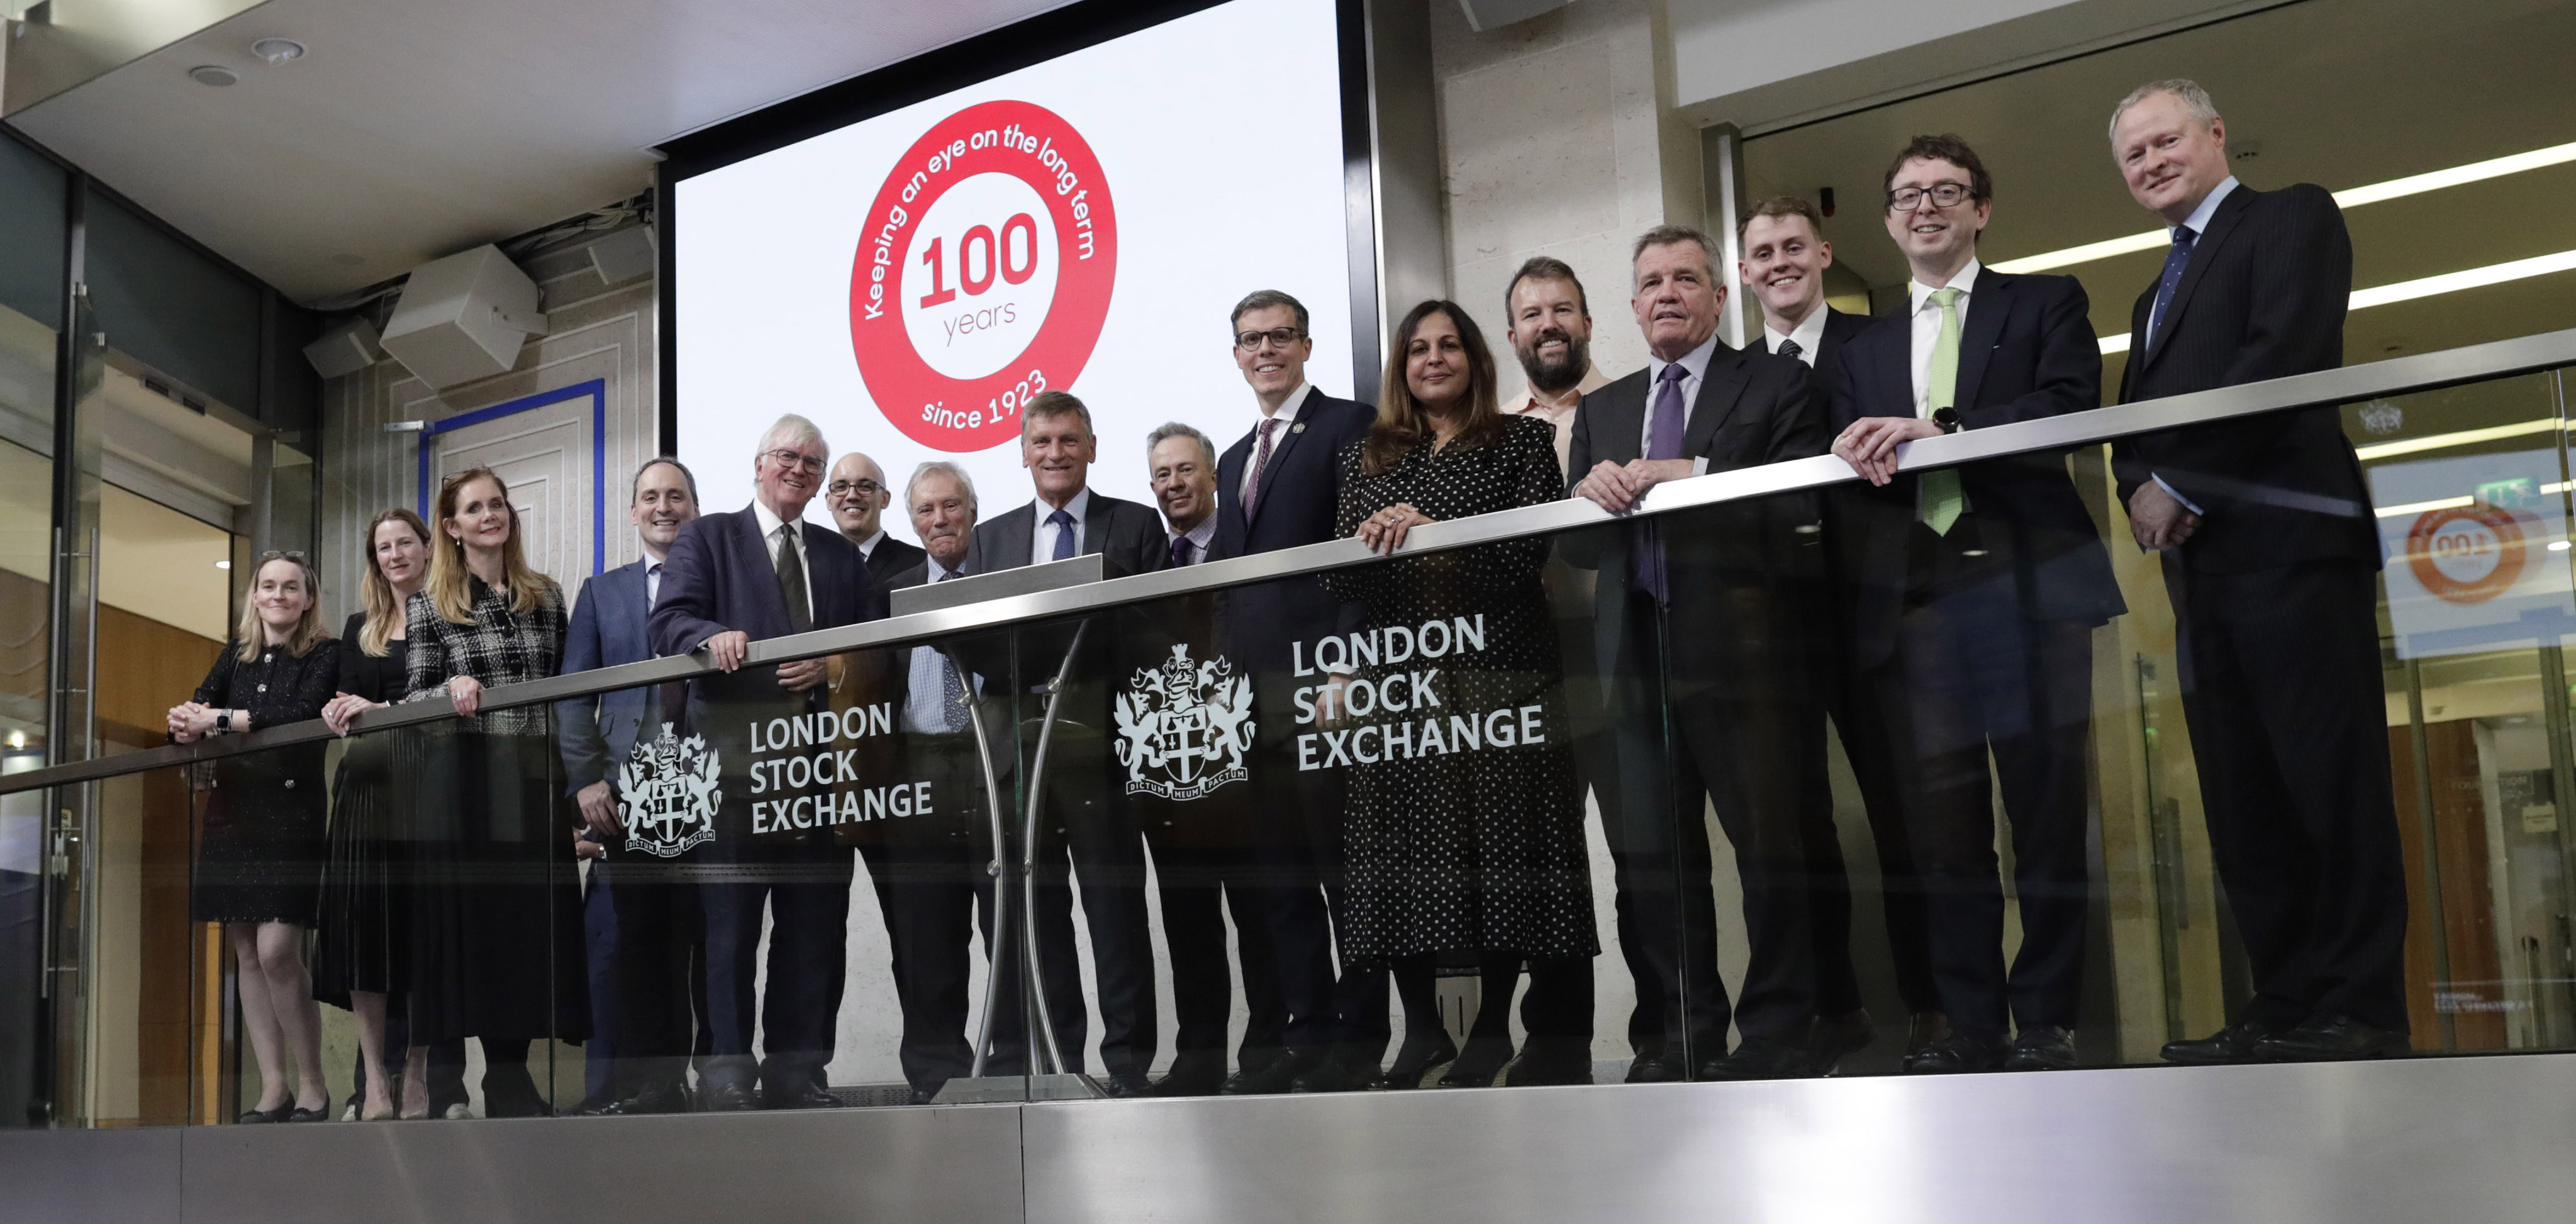 Board members standing on the balcony at the London Stock Exchange